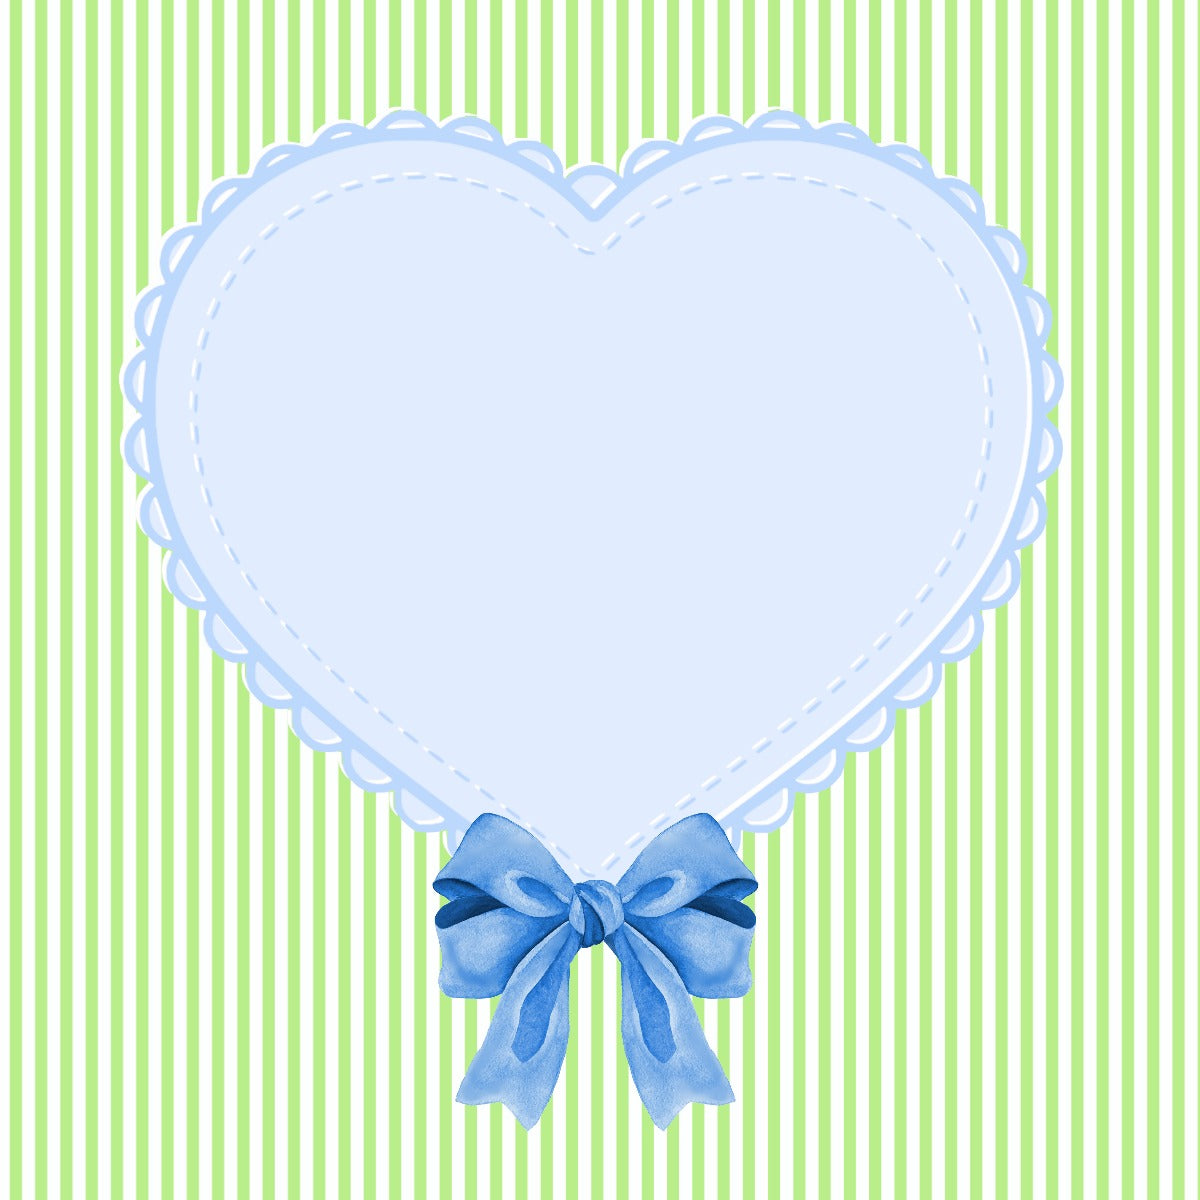 Blue Eyelet Heart on Green Stripes -Bow-on Bottom - 12x12 Scrapbook Page, Frame or Background